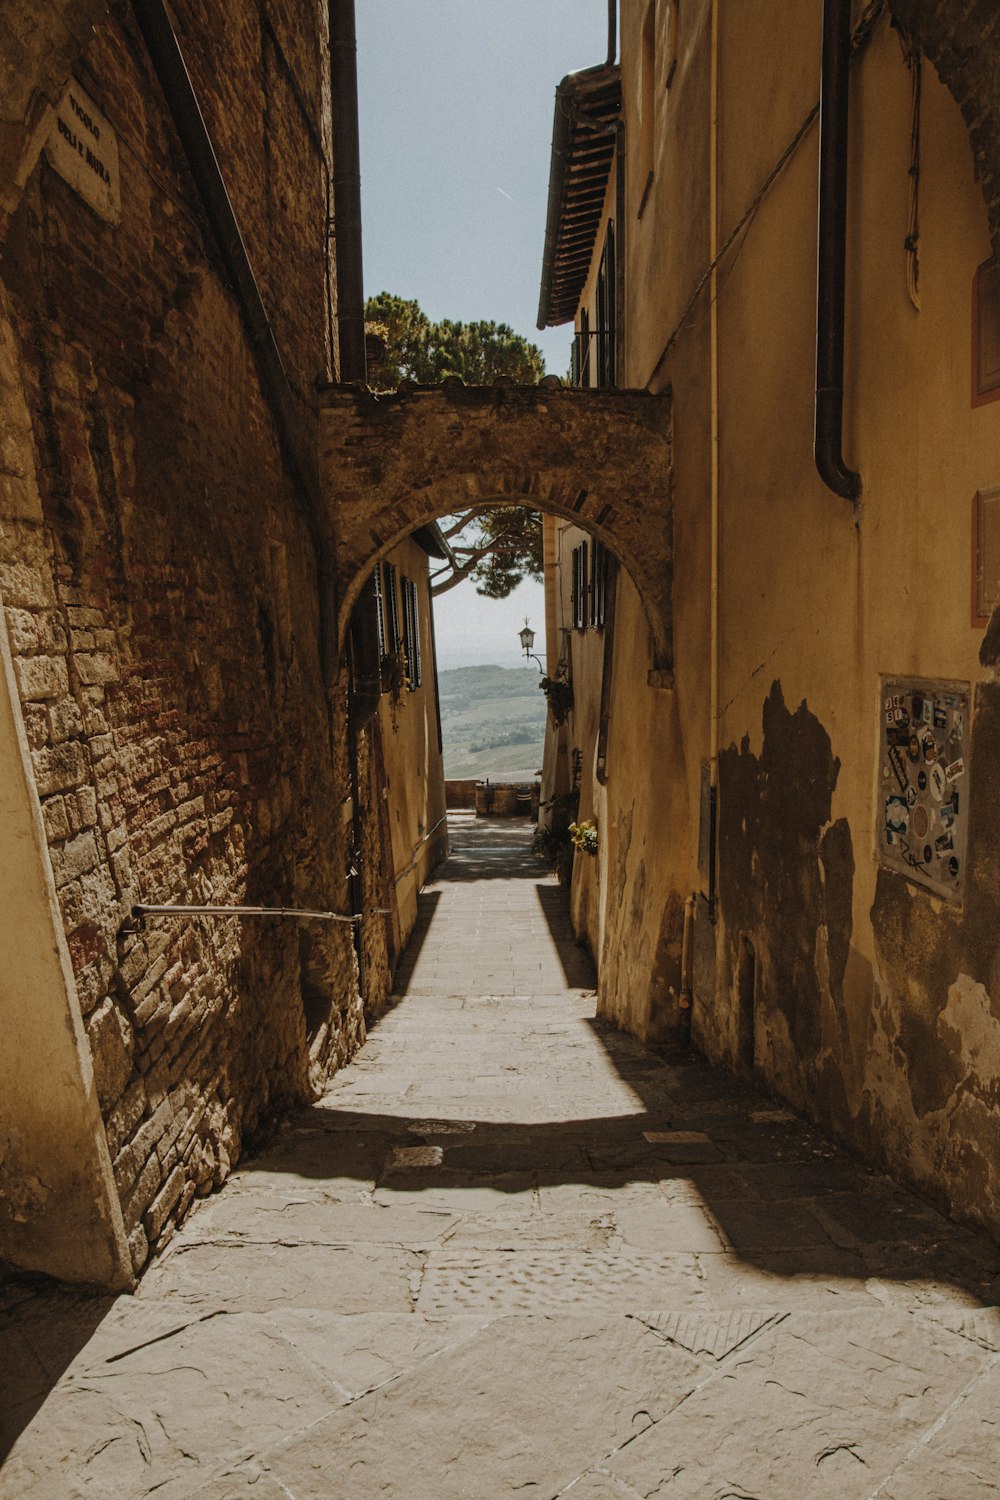 a narrow alley way with a clock on the wall